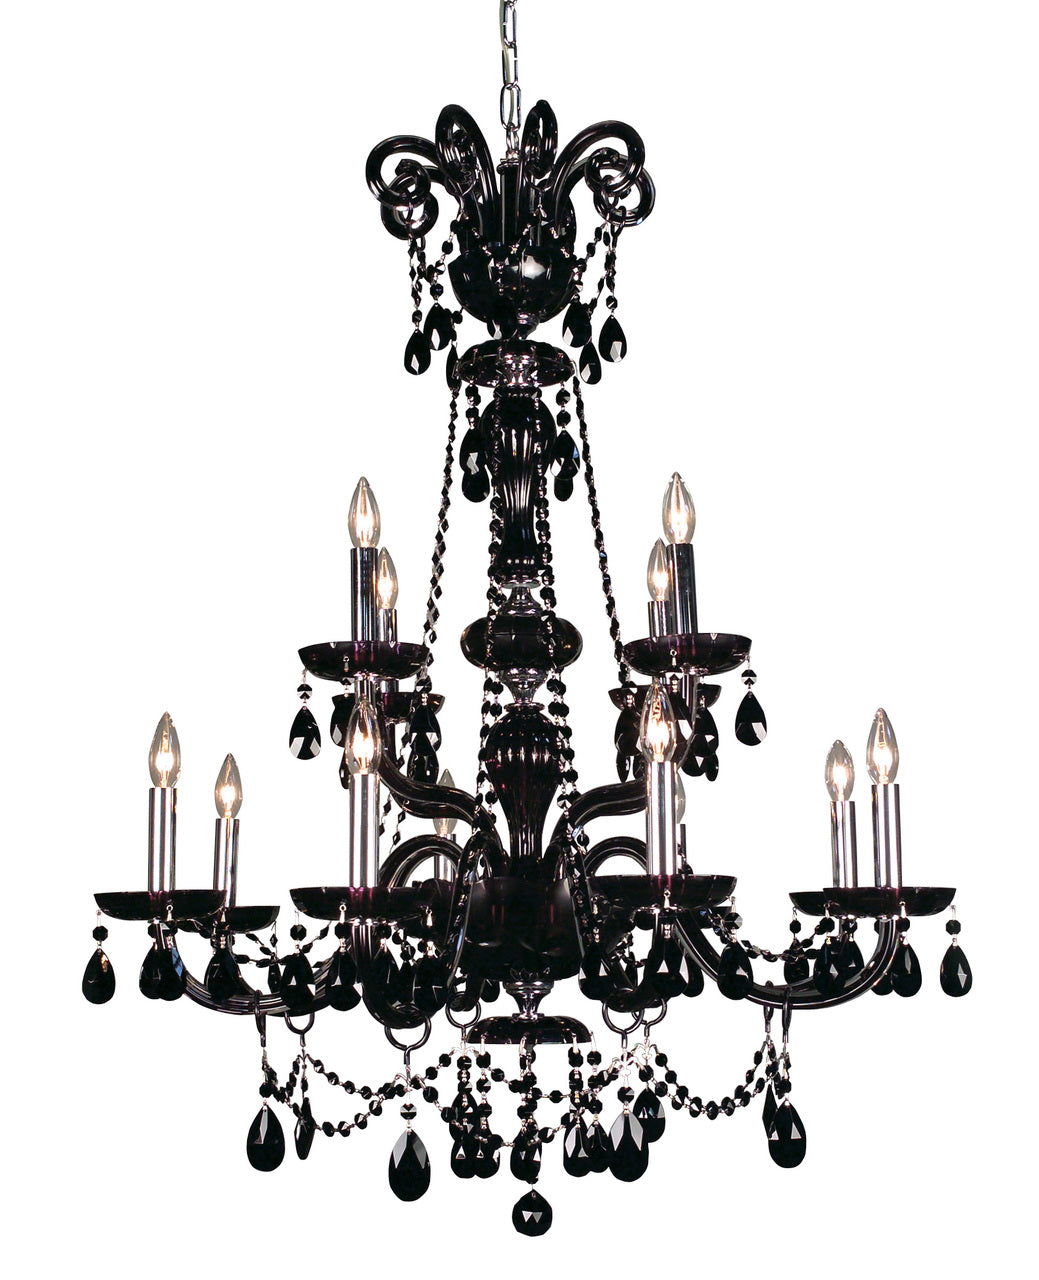 Classic Lighting 82018 SJT Monte Carlo Elite Crystal Chandelier in Black (Imported from Spain)